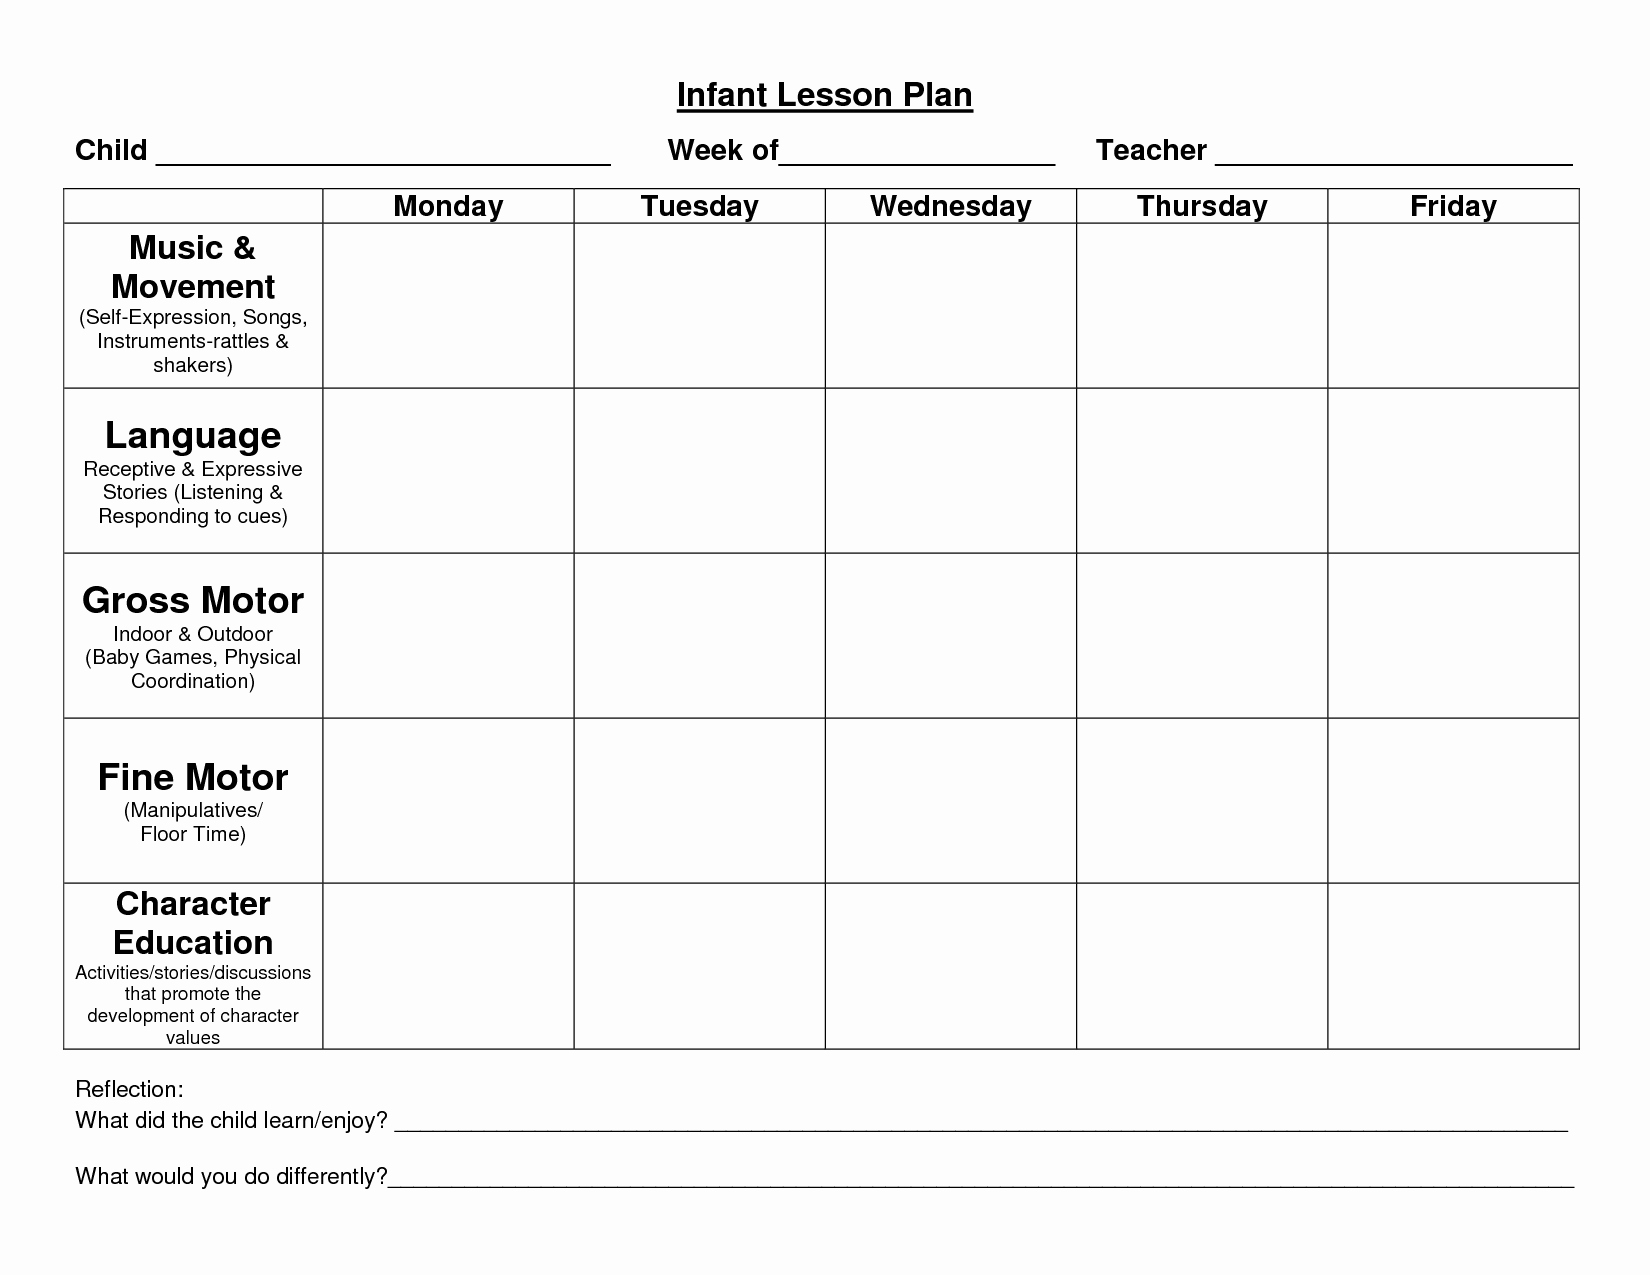 Lesson Plan Template for toddlers Lovely Infant Blank Lesson Plan Sheets